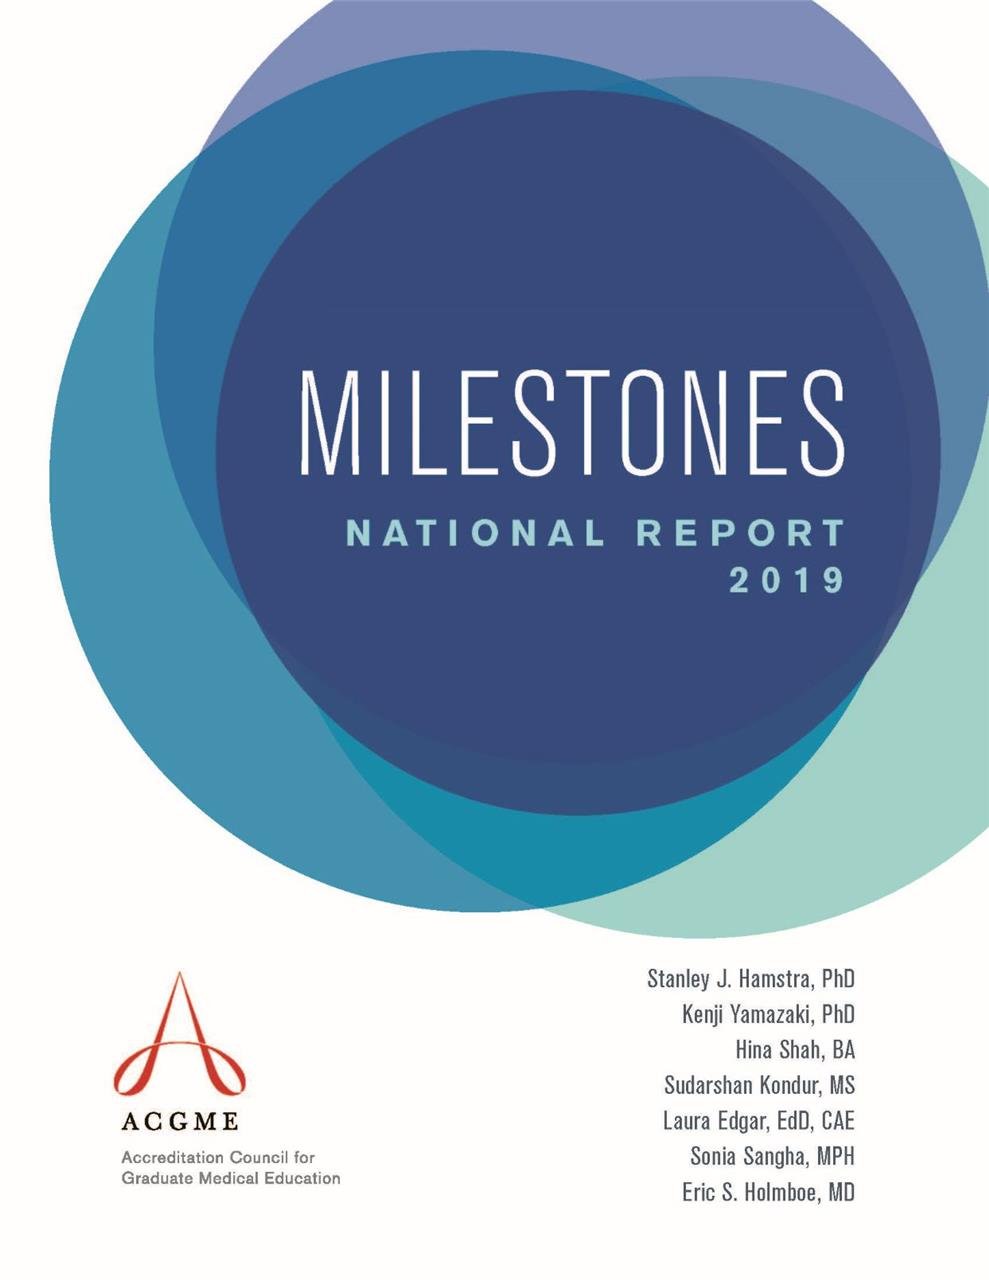 2019 Milestones National Report Now Available